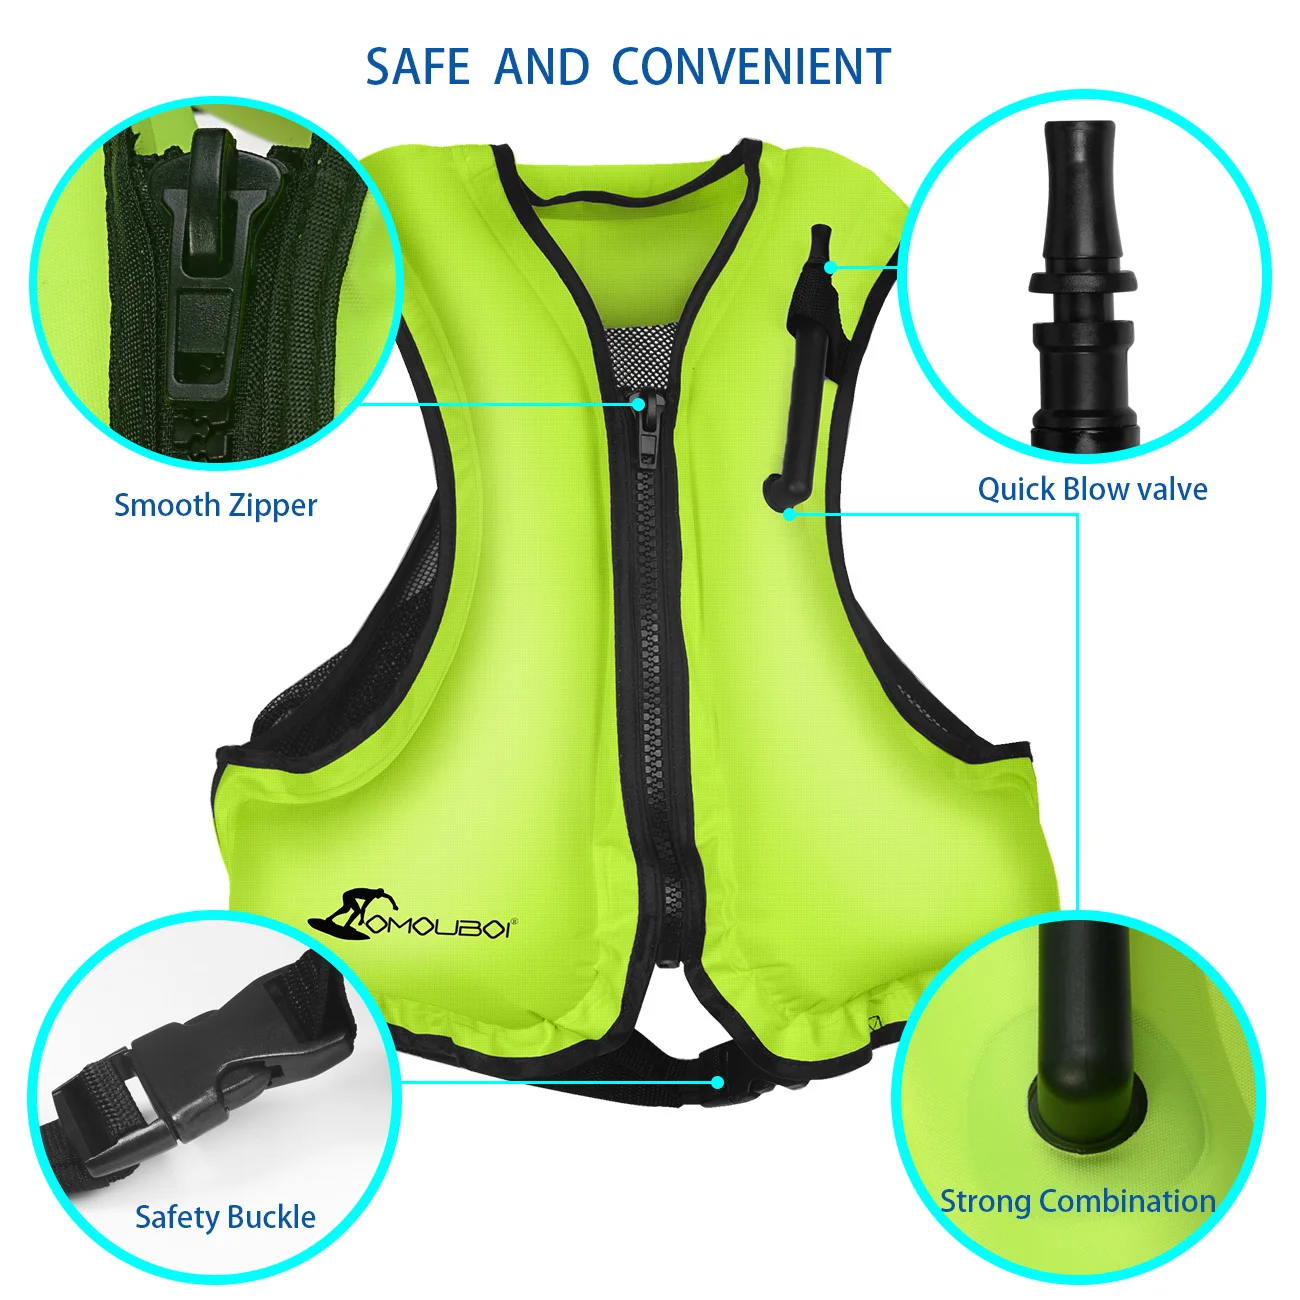 
OEM Swimming Life Jacket Manufacturer Wholesale Safety Floatage Vest Water Swimming PFD for Men and Women 